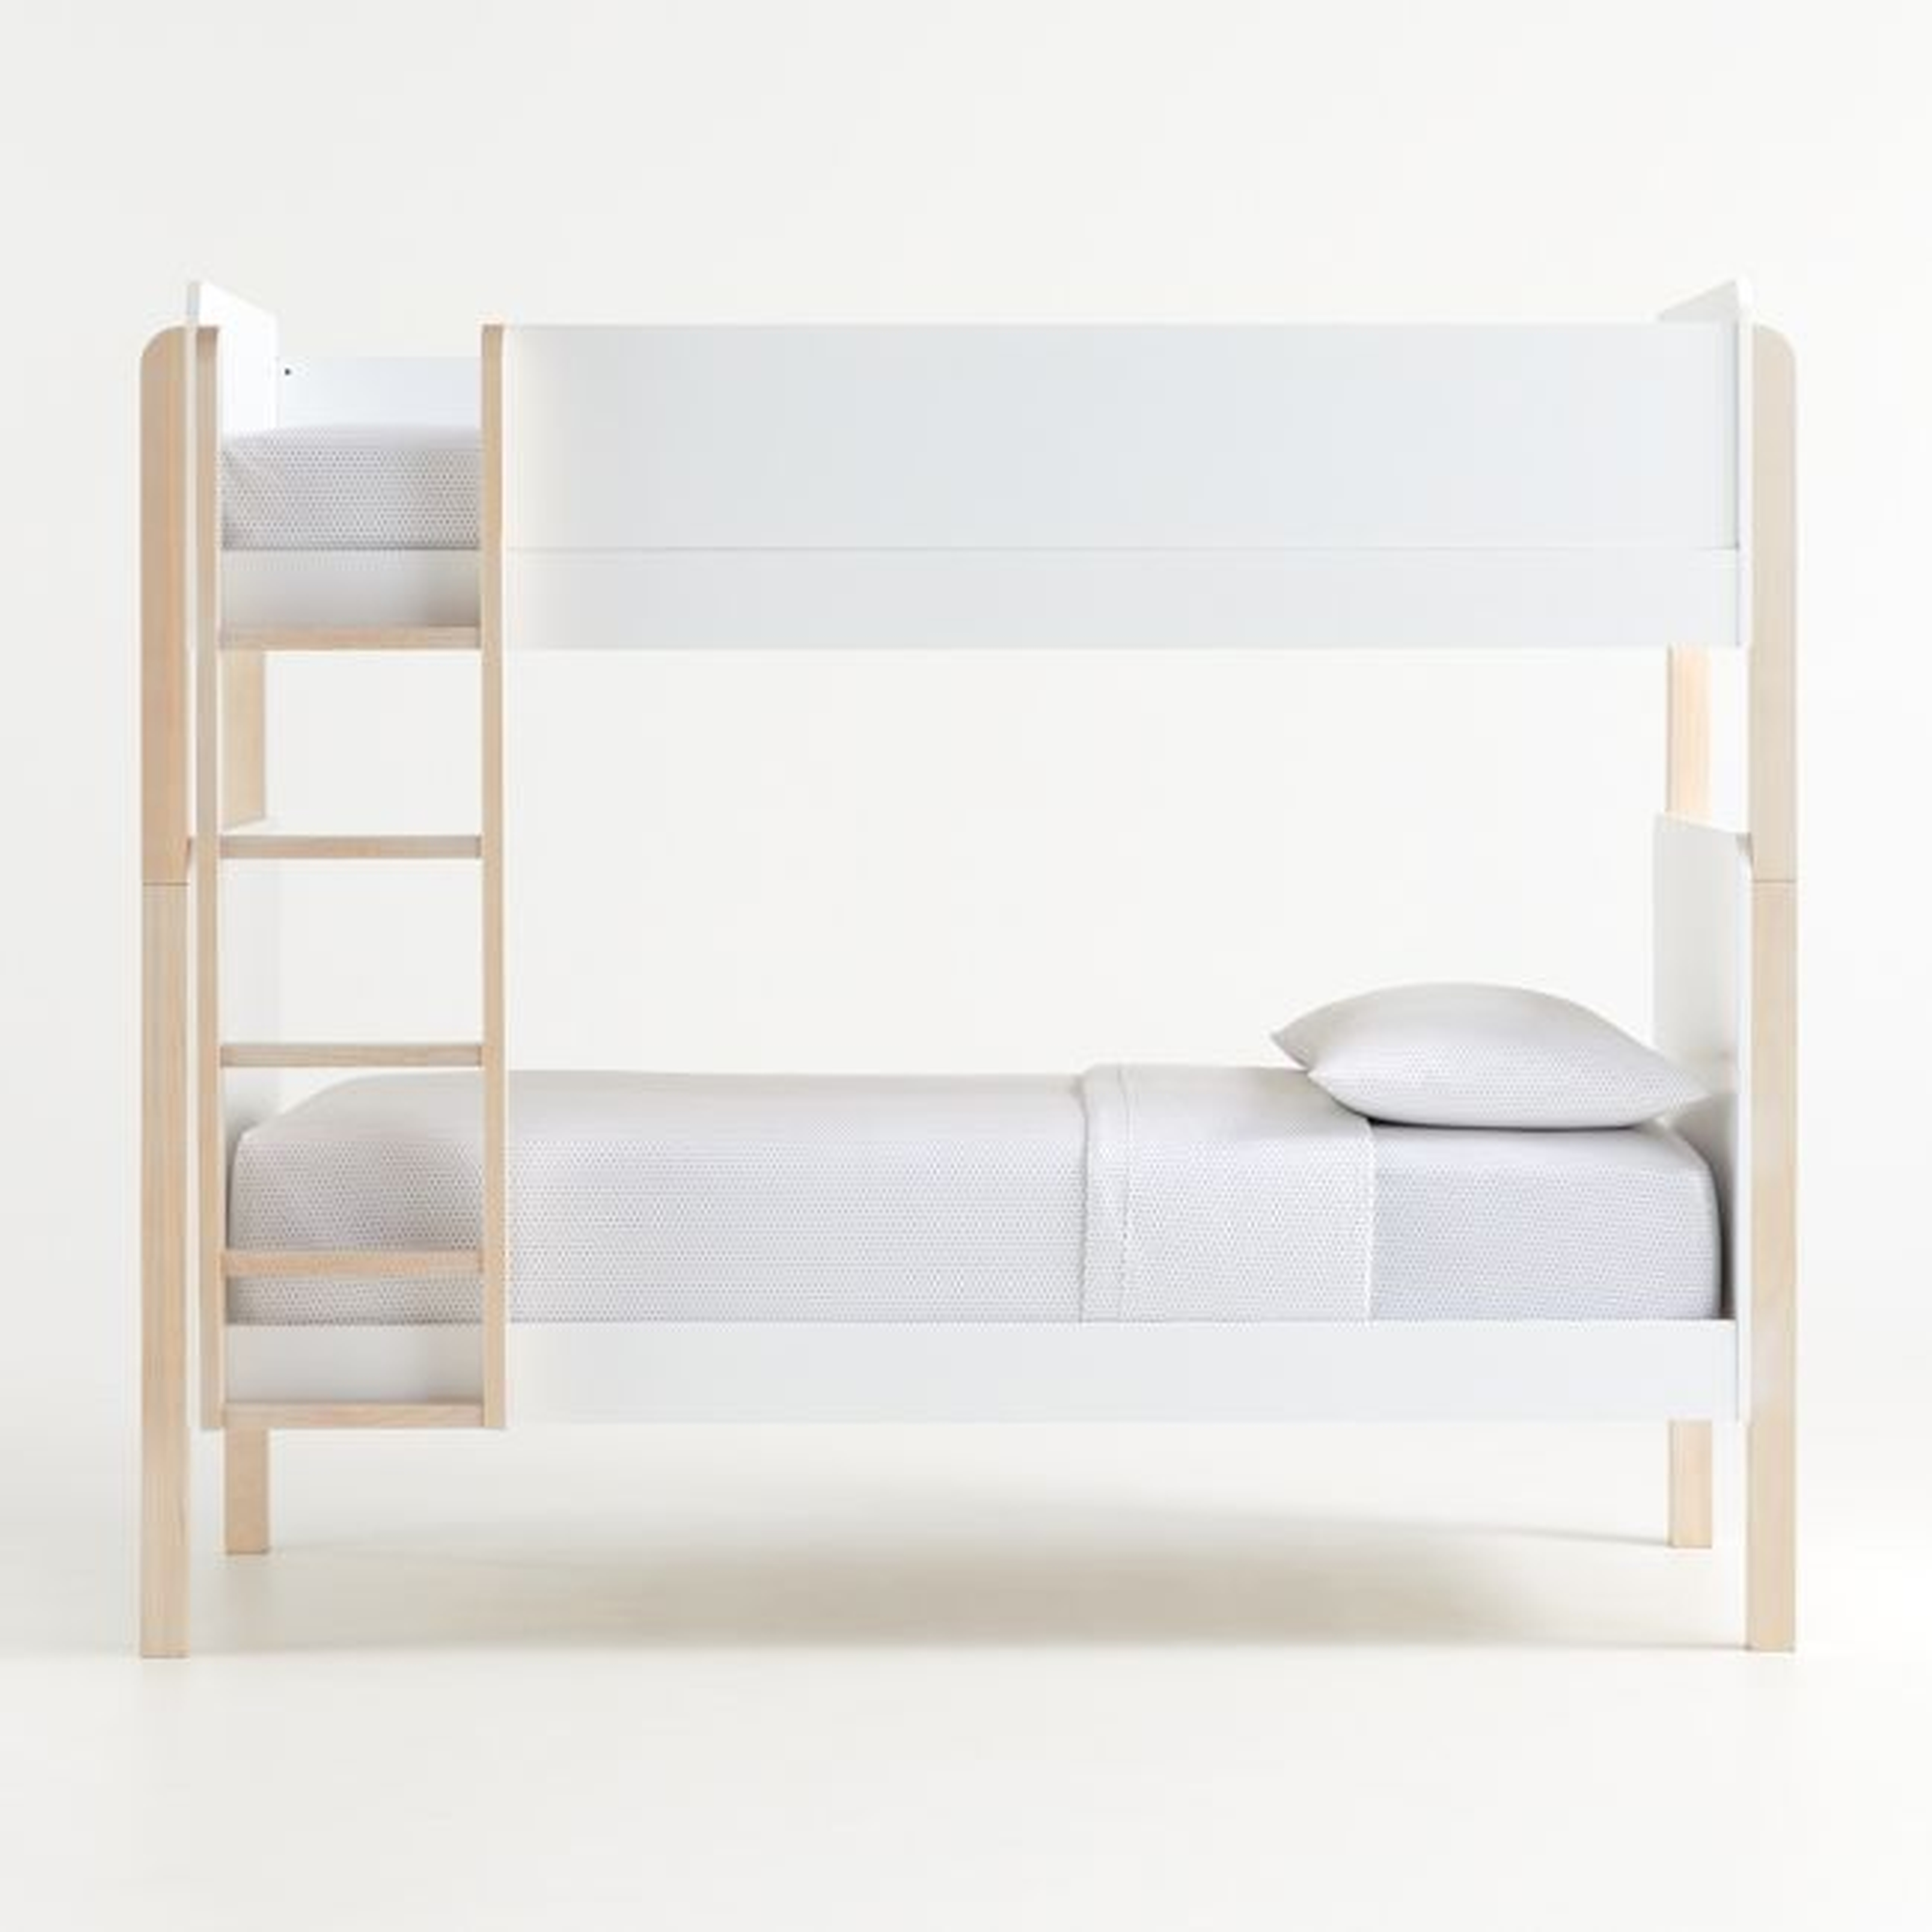 Babyletto TipToe White & Washed Natural Wood Kids Bunk Bed - Crate and Barrel